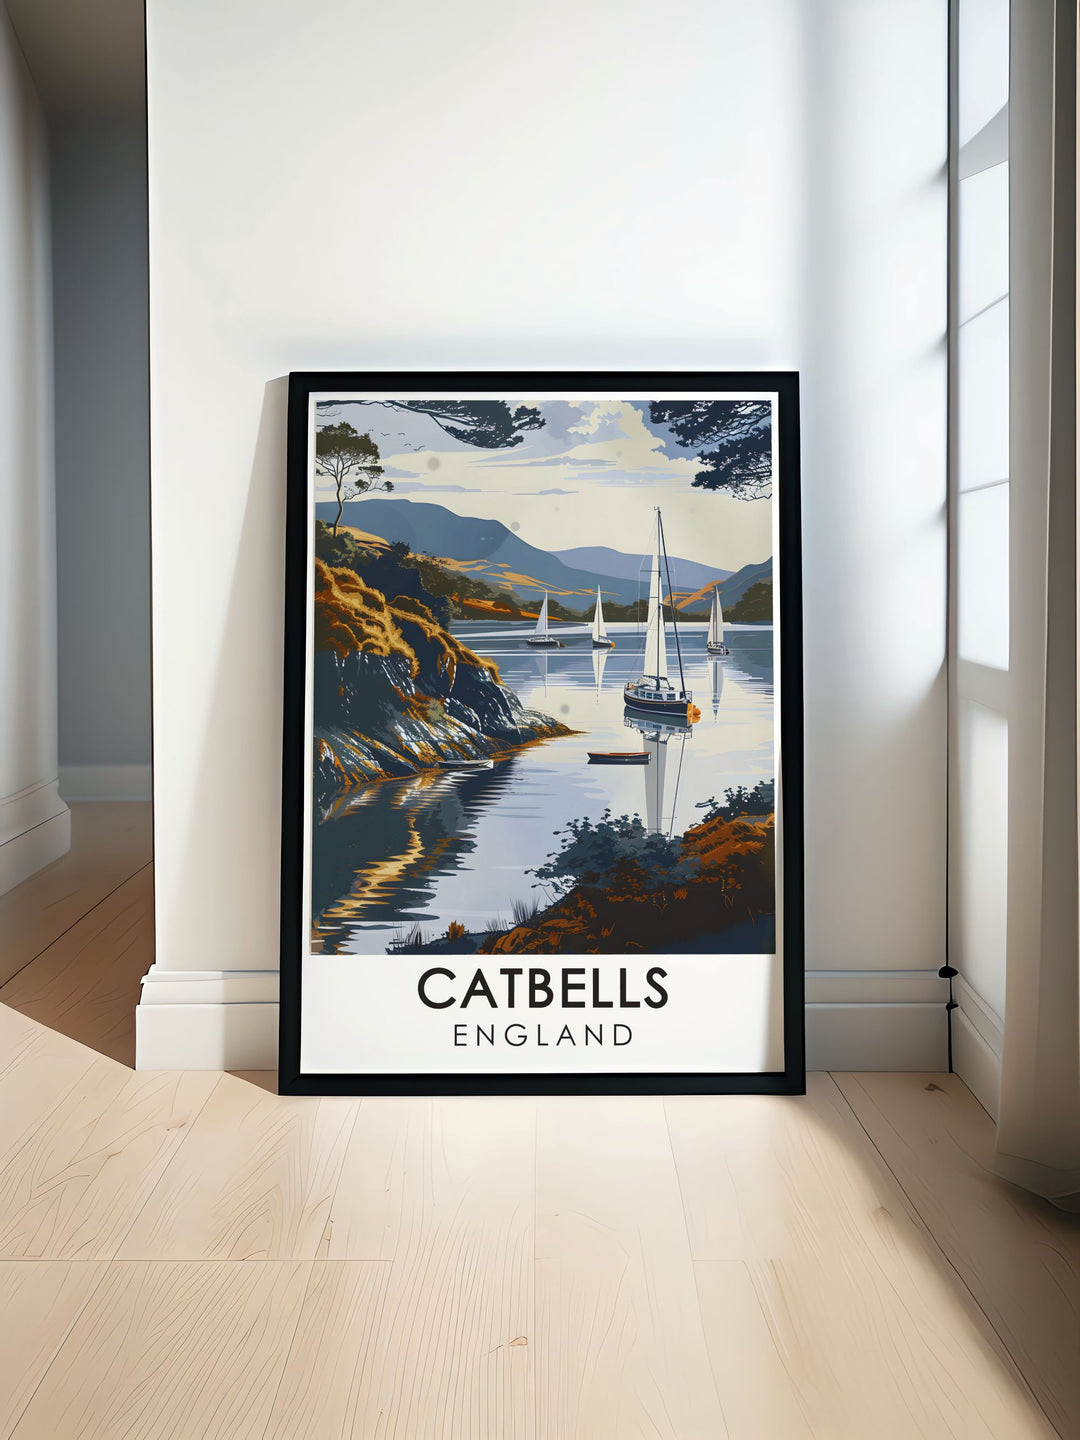 Catbells Summit art print showcasing the stunning Lake District landscape and Derwentwater Shoreline perfect for adding natural beauty to any room or as a unique travel gift for nature lovers and adventure seekers